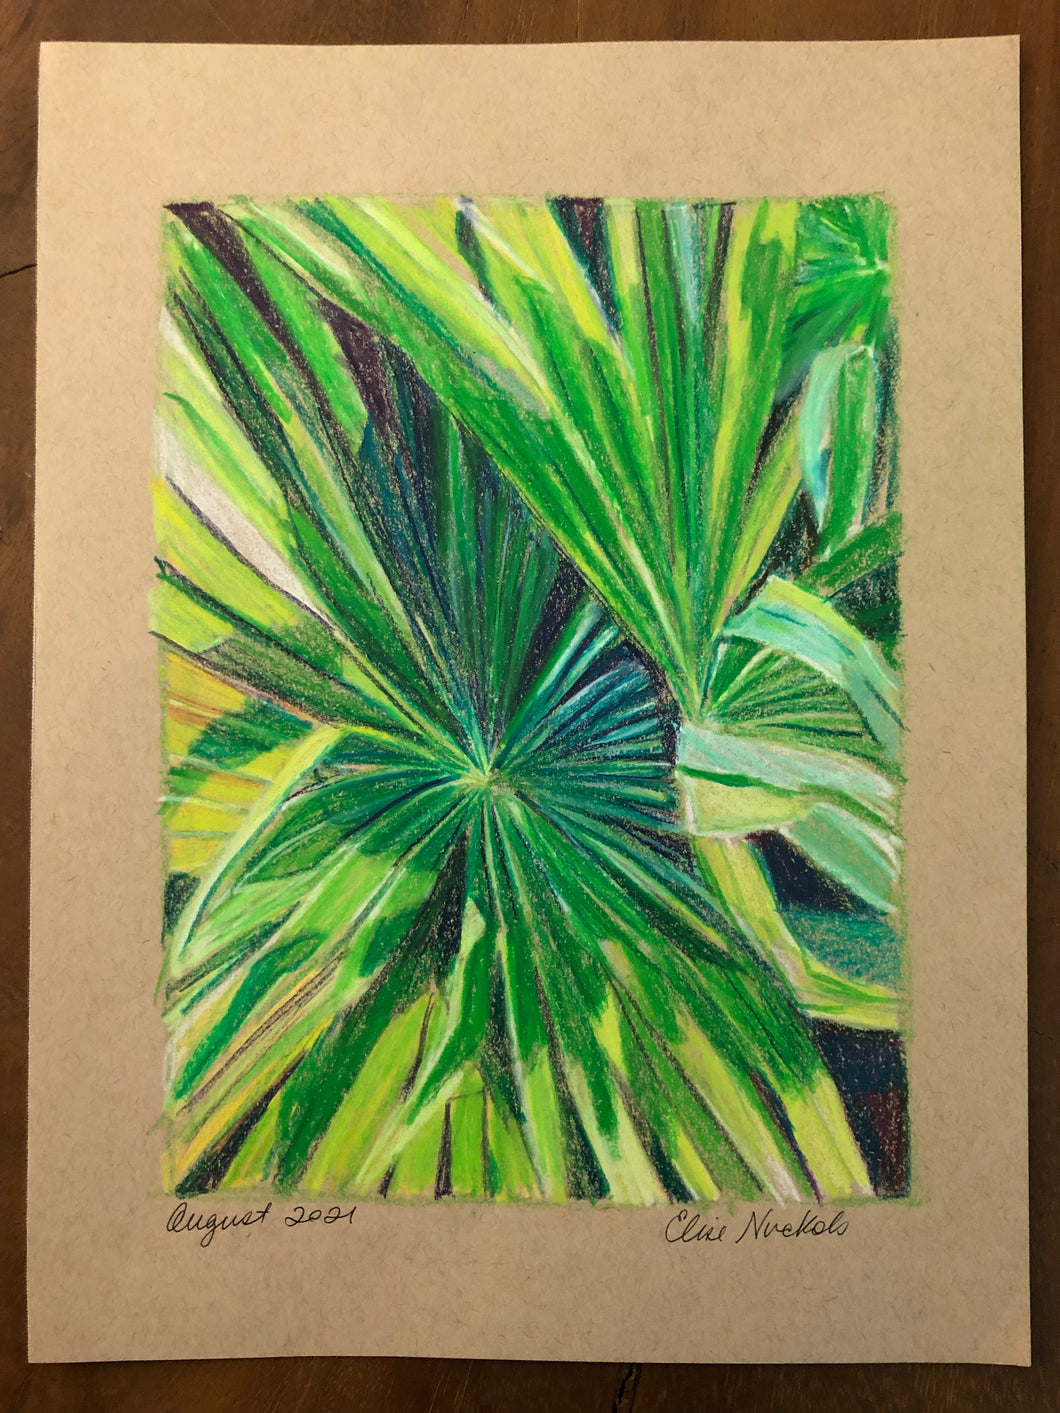 Palm Frond